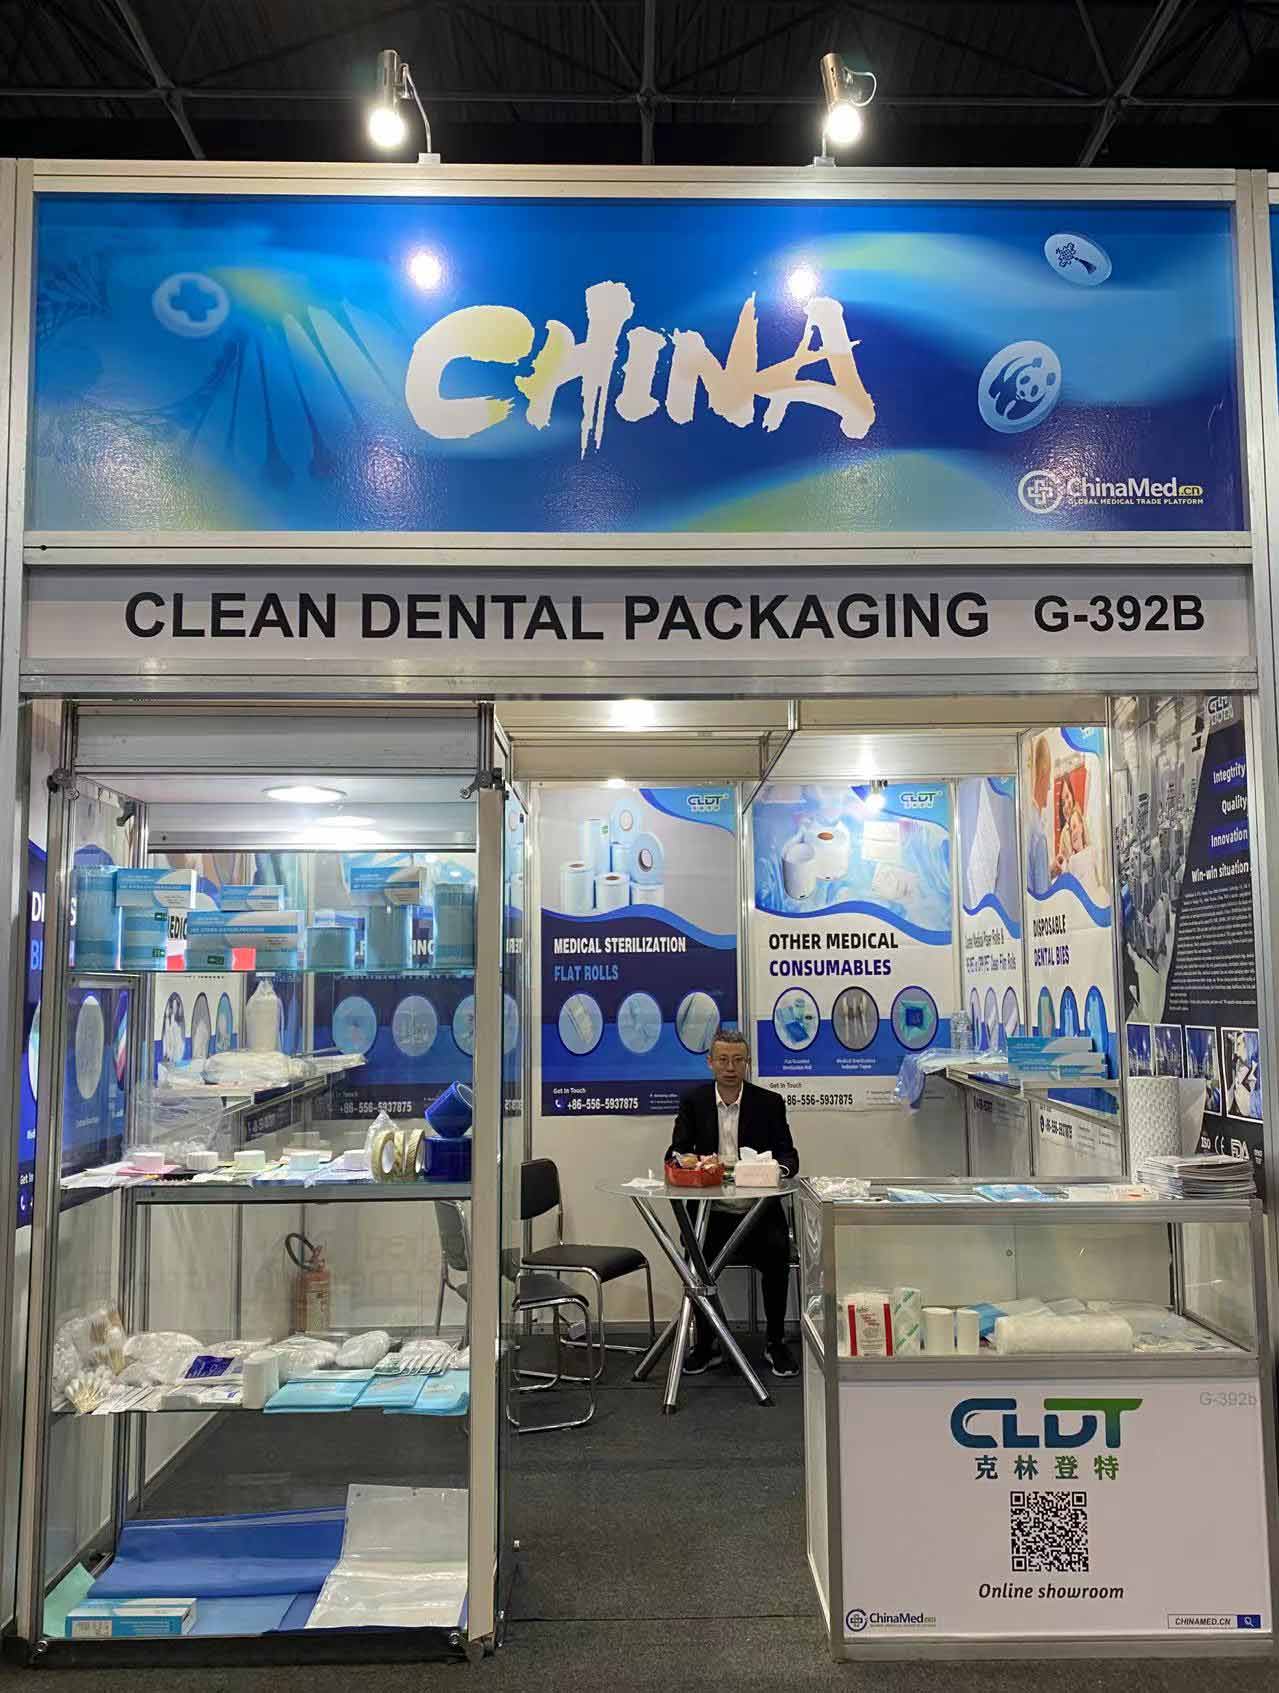 What is Clean Dental Showcasing at the Hospitalar Exhibition?